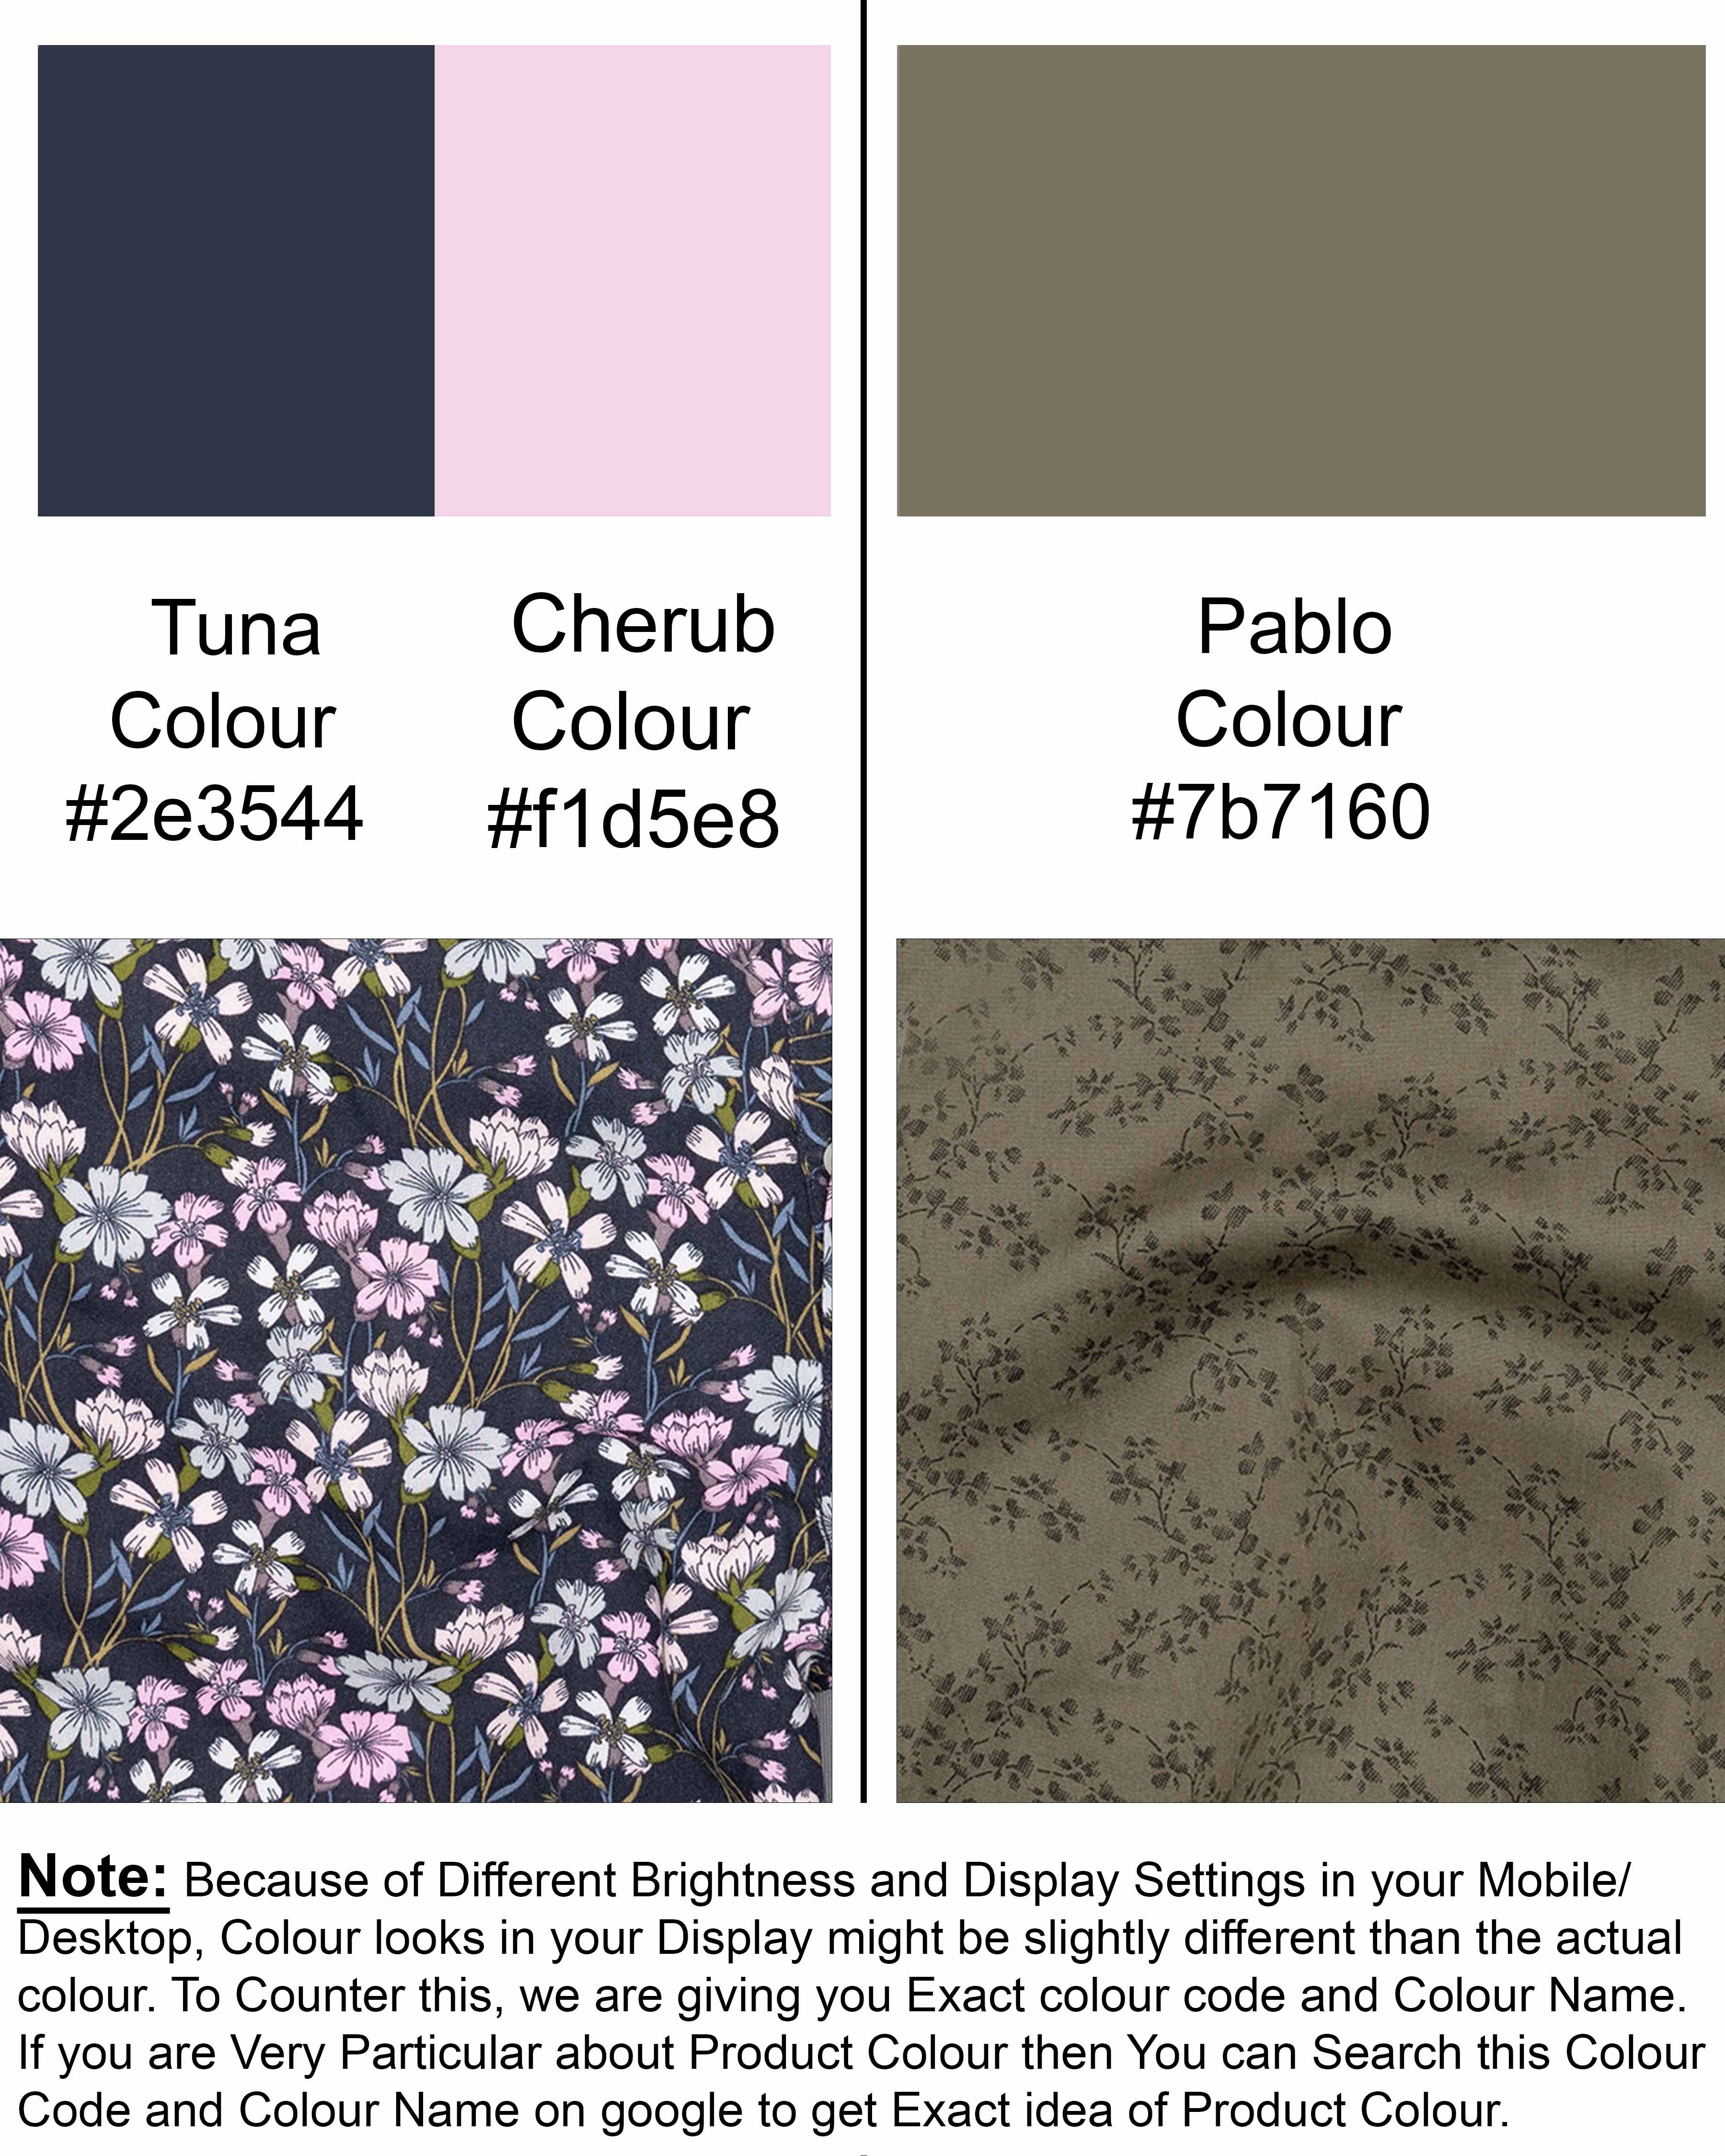 Tuna Flowers Printed and Pablo Tencel Boxers BX377-28, BX377-30, BX377-32, BX377-34, BX377-36, BX377-38, BX377-40, BX377-42, BX377-44